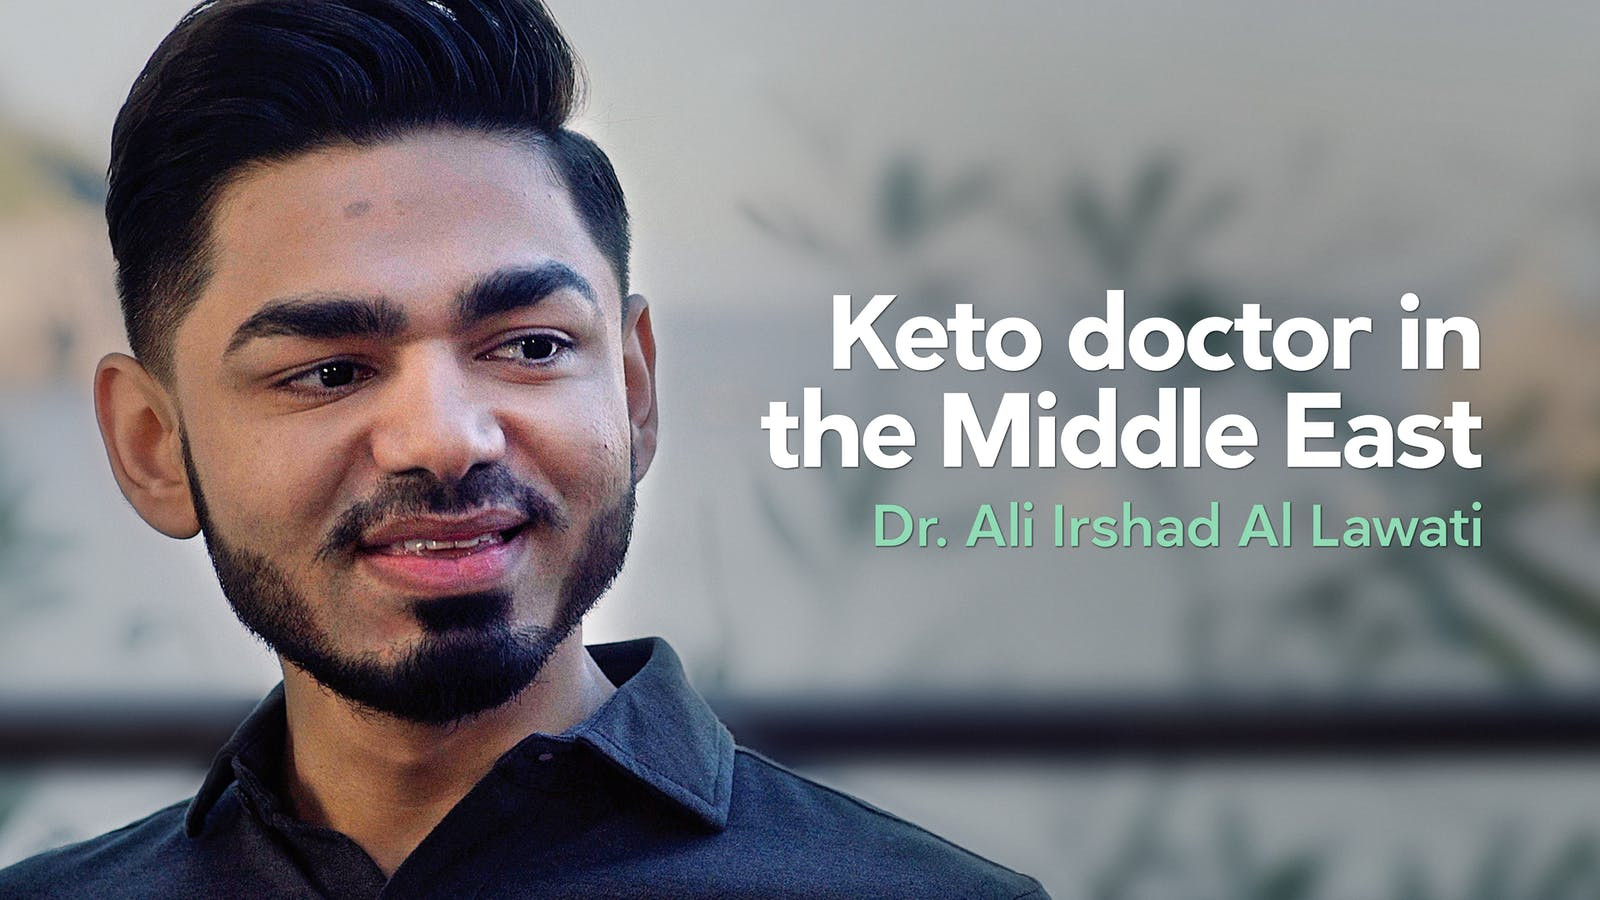 The Diet Doctor Keto
 Being a keto doctor in the Middle East Diet Doctor